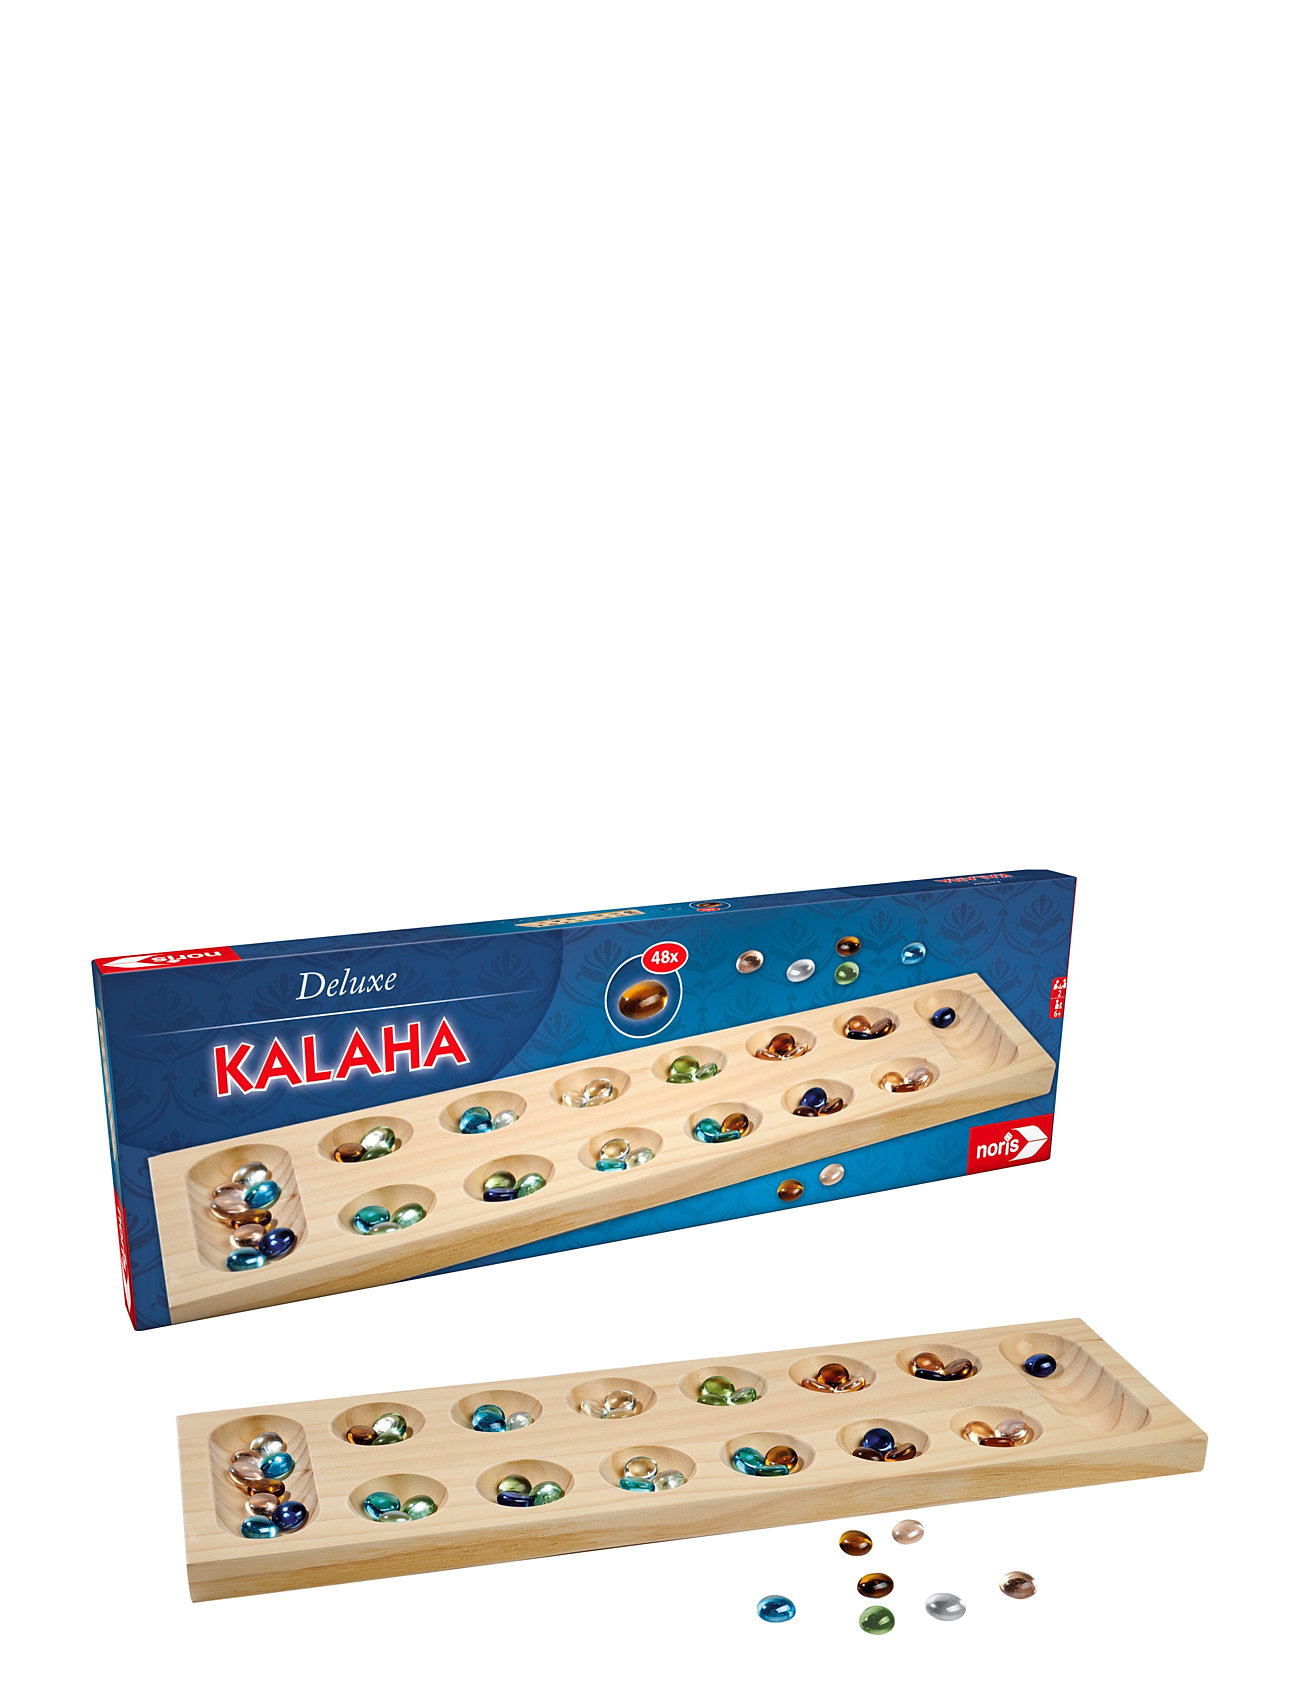 Deluxe Kalaha Toys Puzzles And Games Games Board Games Multi/patterned Noris